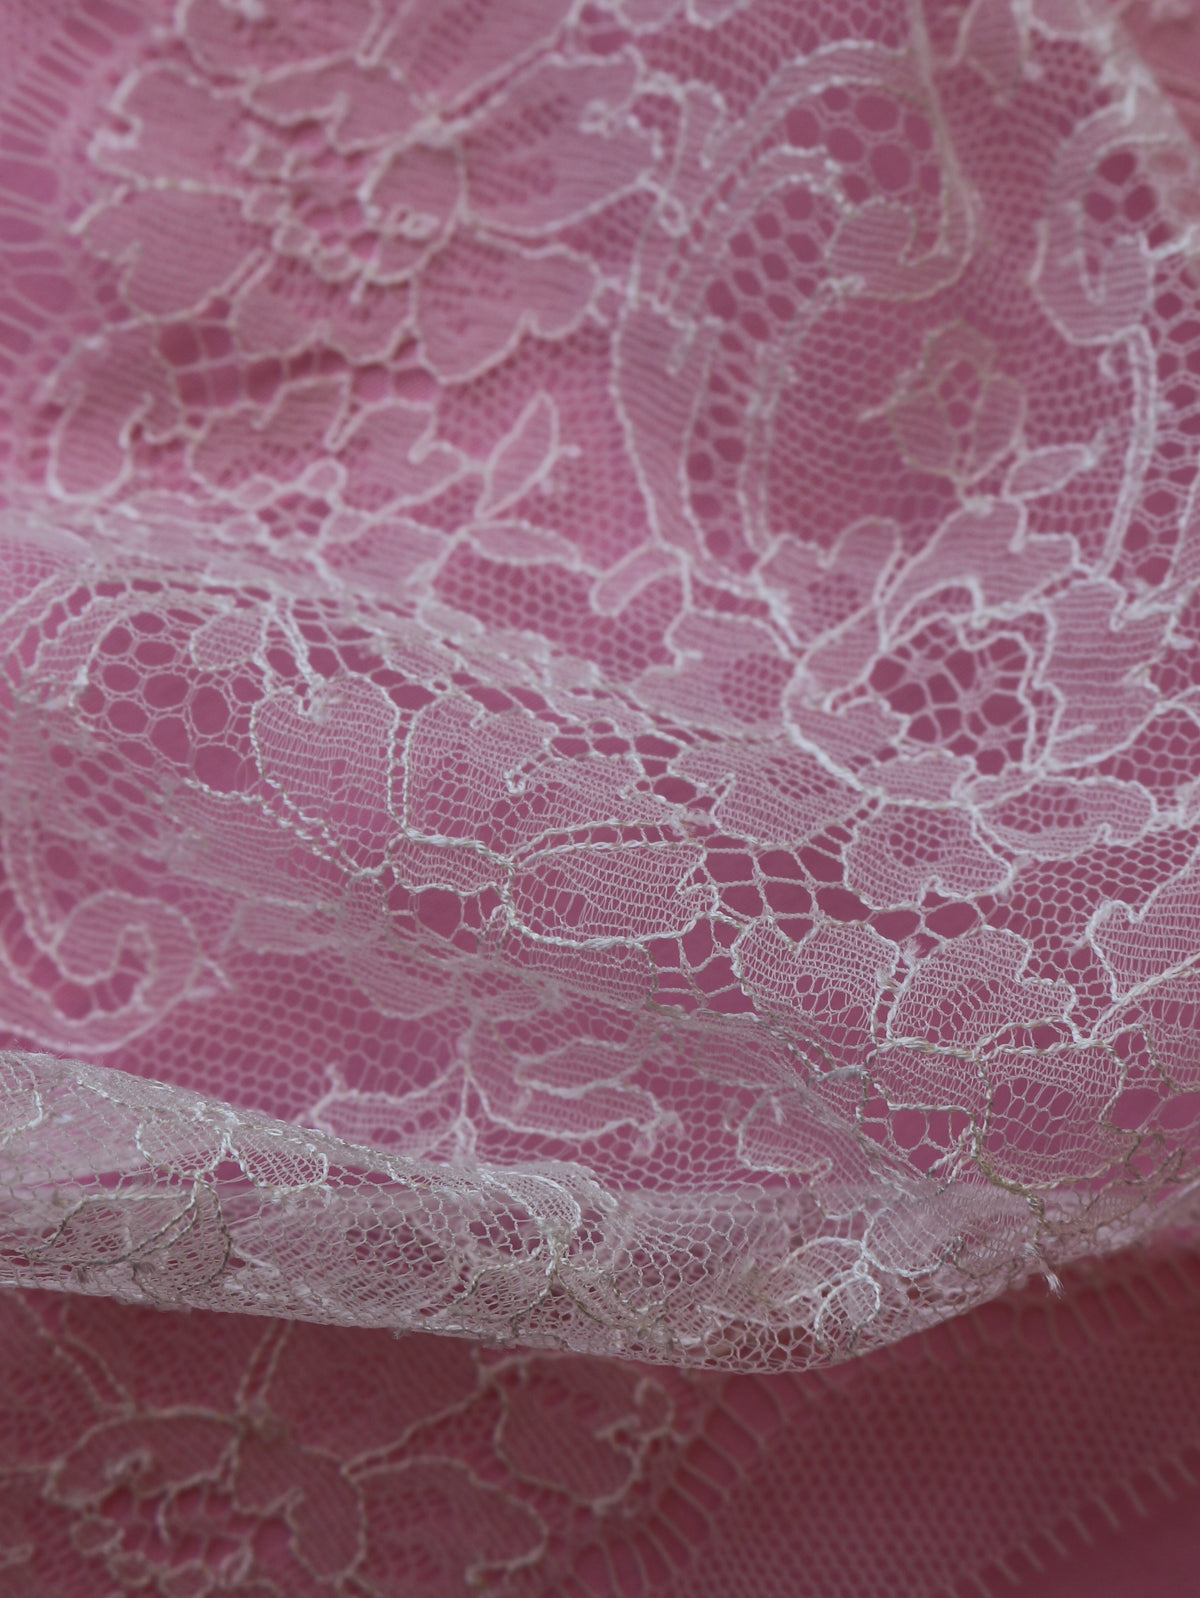  8 Wide Two-Tone Red & Pink Stretch Leavers Lace Trim, Made in  France, Sold by The Yard